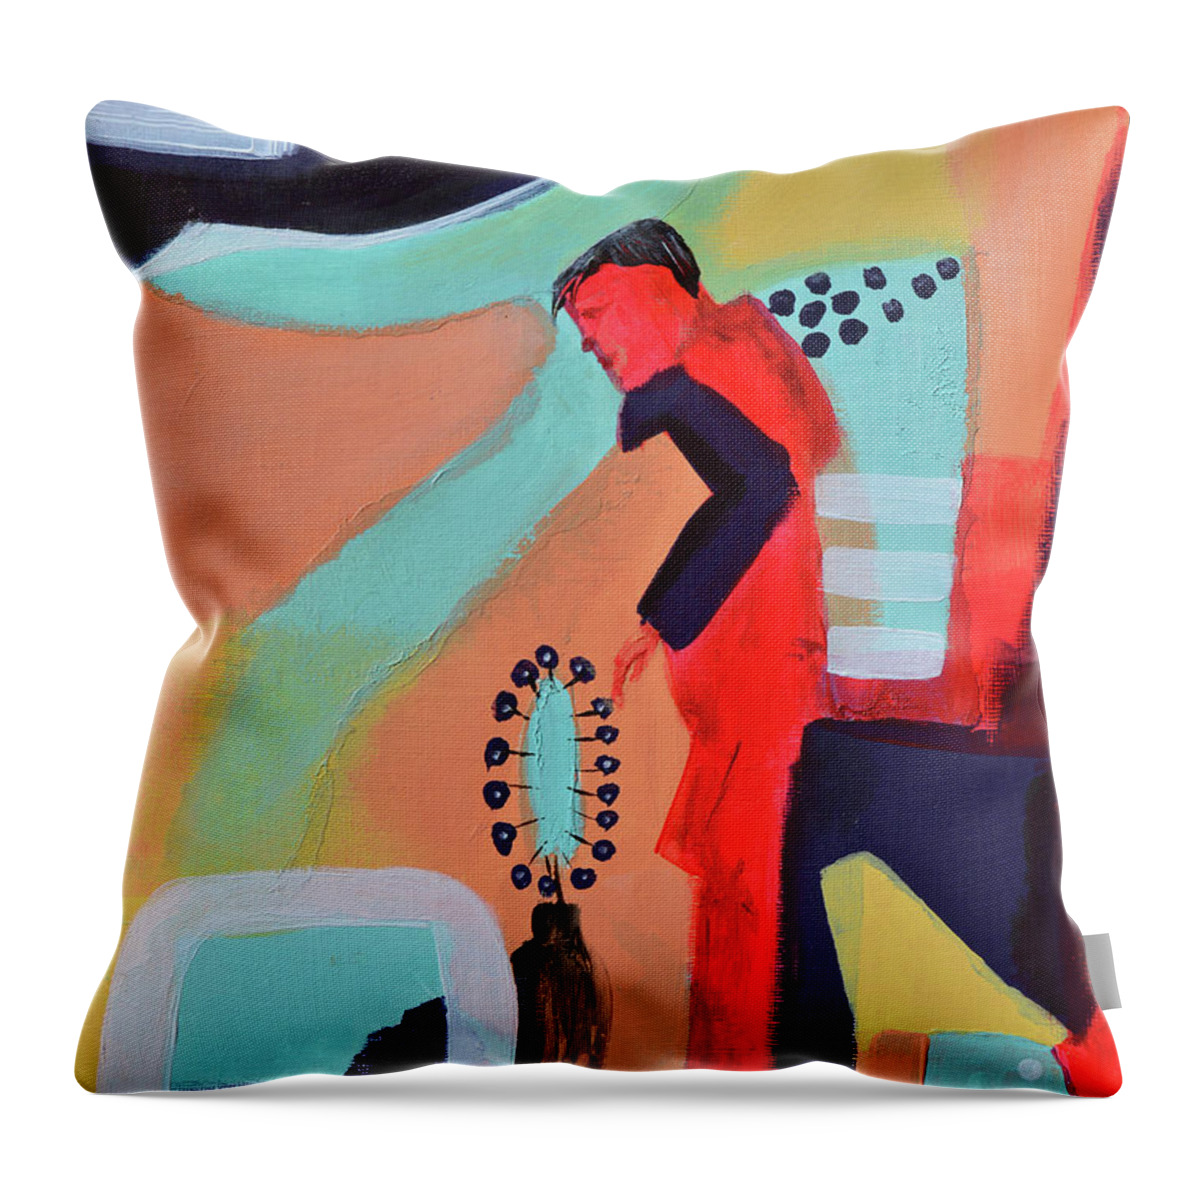 Senior Citizen Throw Pillow featuring the painting A Senior Moment by Donna Blackhall